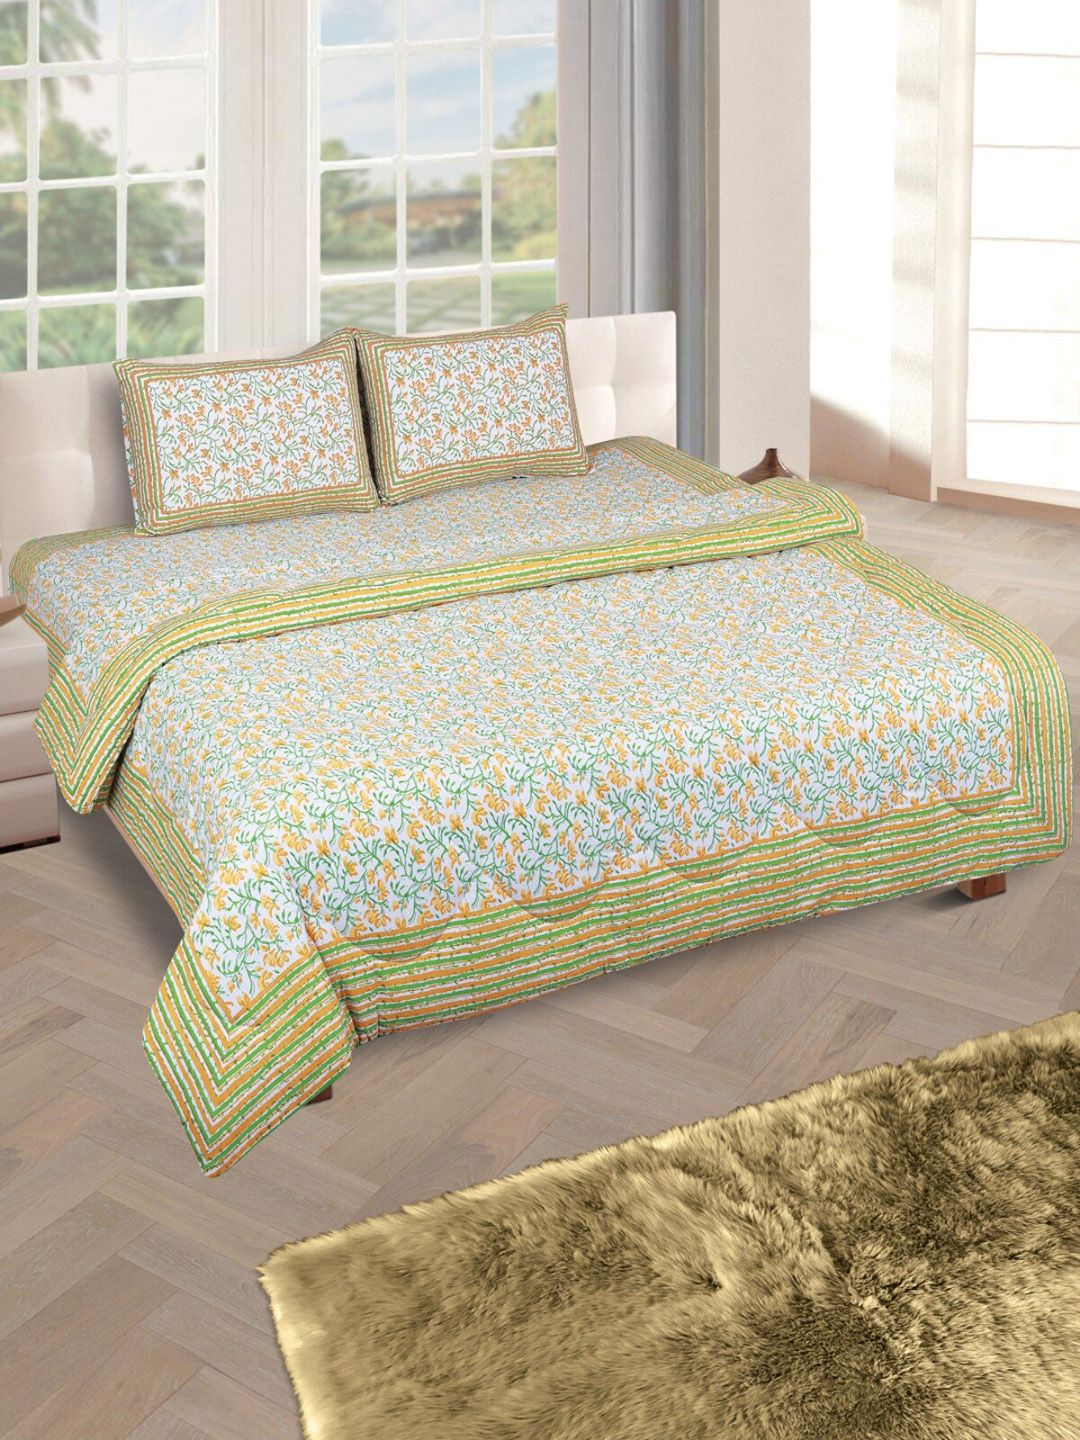 ROMEE Green & Off-White Floral Printed Cotton Double King Bedding Set Price in India